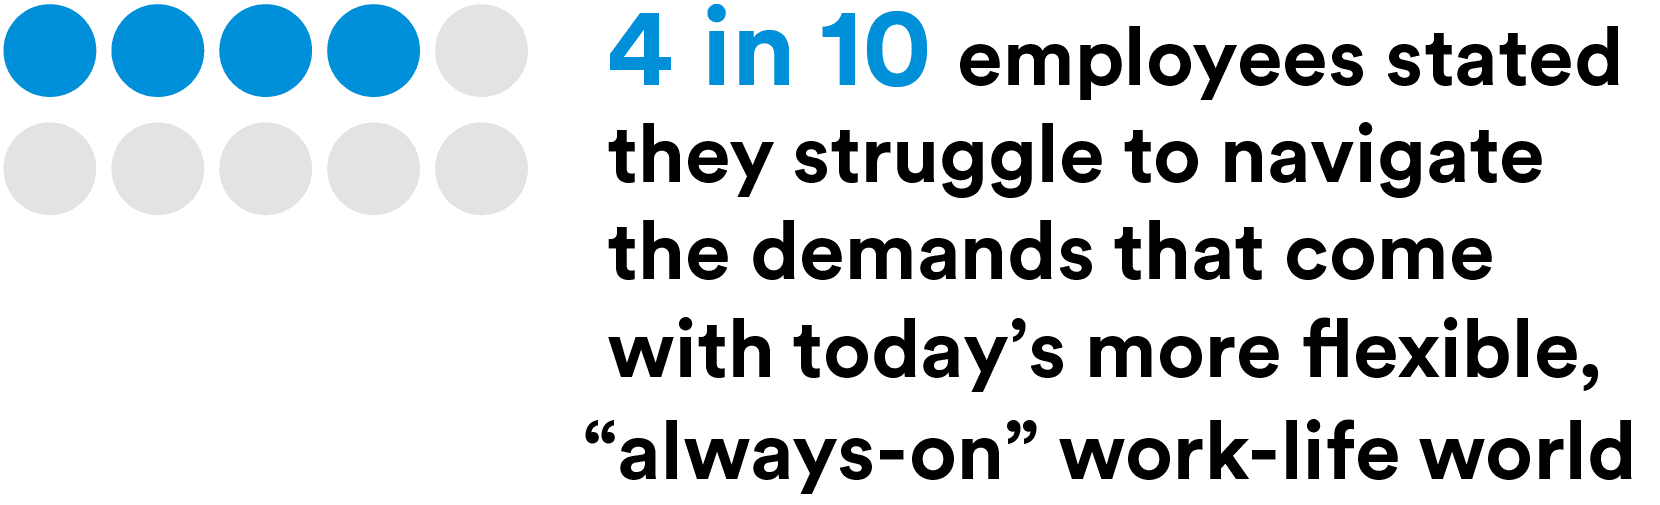 infographic on 4 in 10 employees struggling